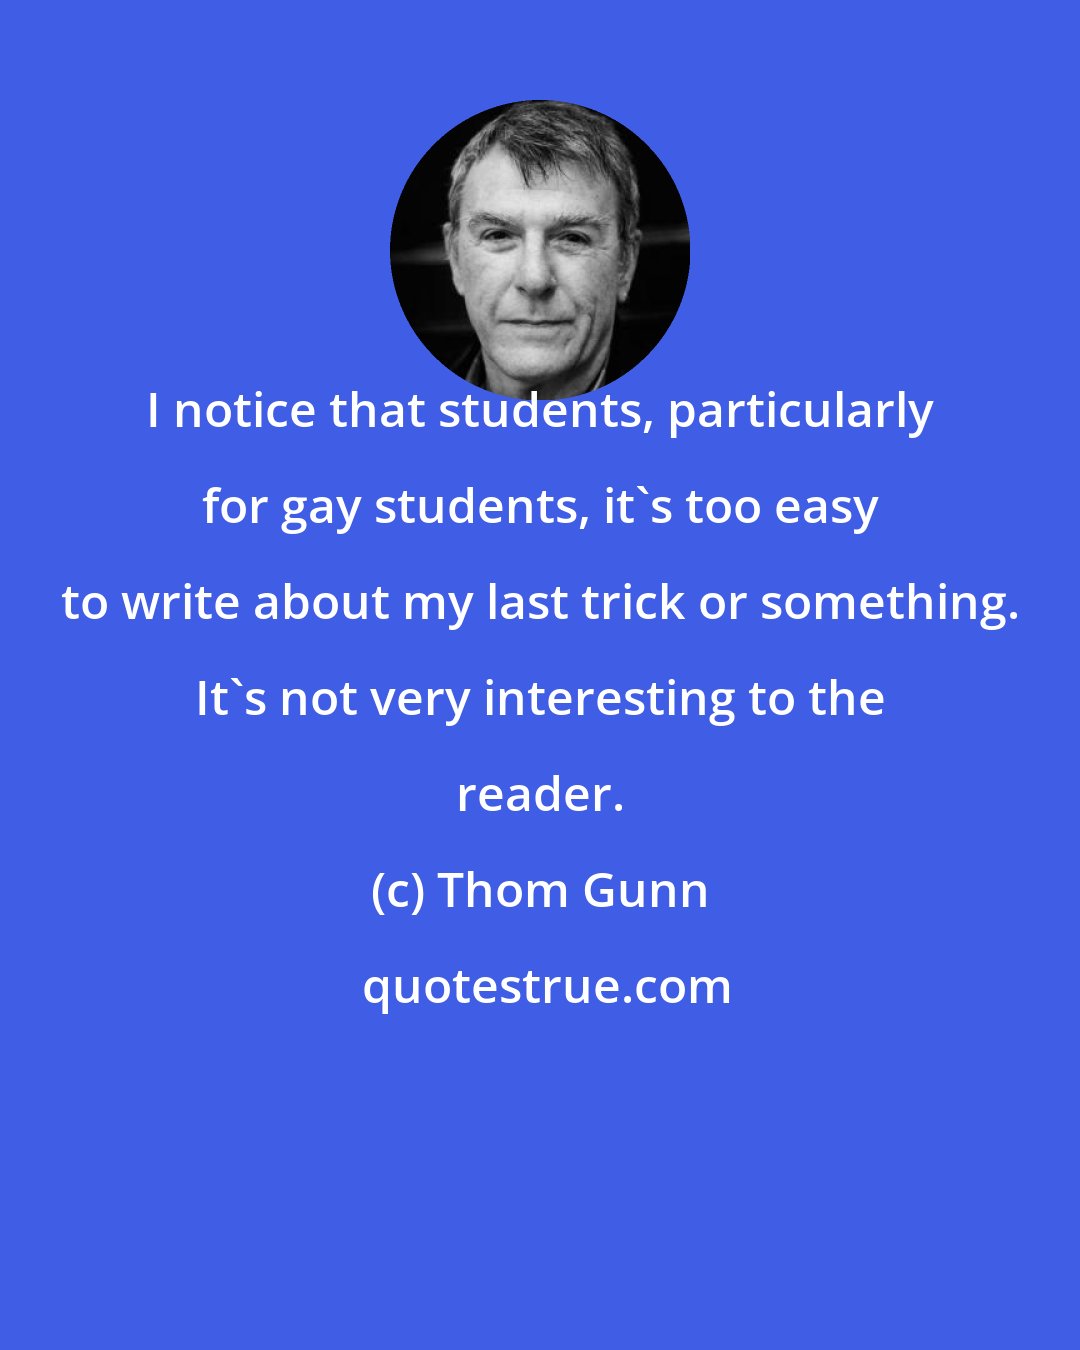 Thom Gunn: I notice that students, particularly for gay students, it's too easy to write about my last trick or something. It's not very interesting to the reader.